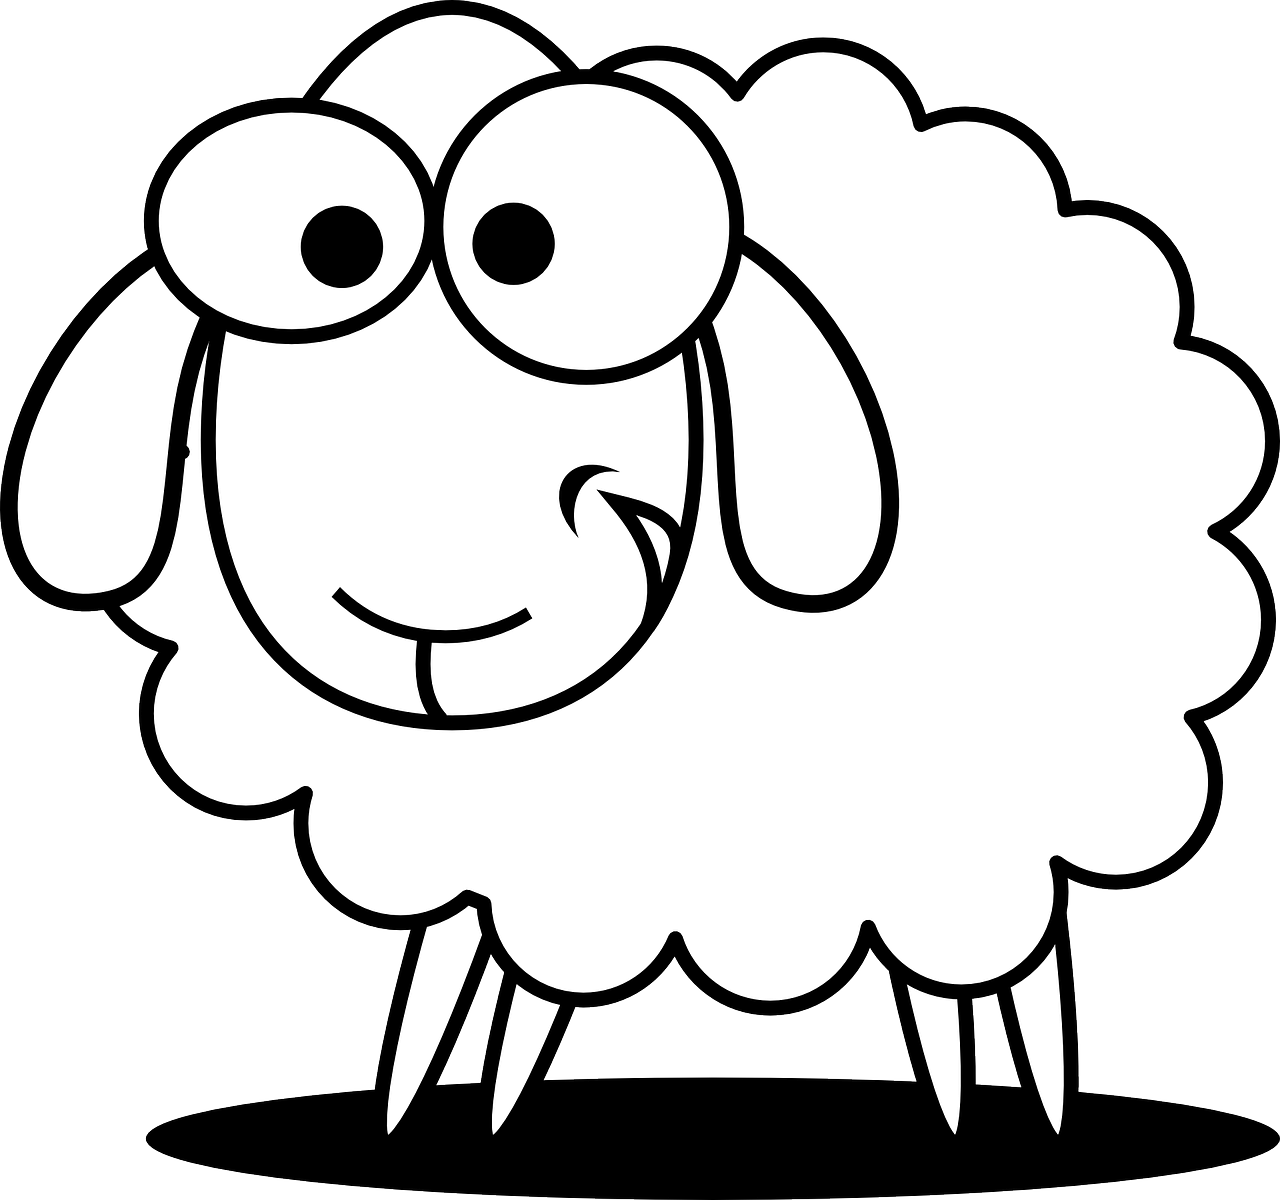 Clipart sheep easy, Clipart sheep easy Transparent FREE for